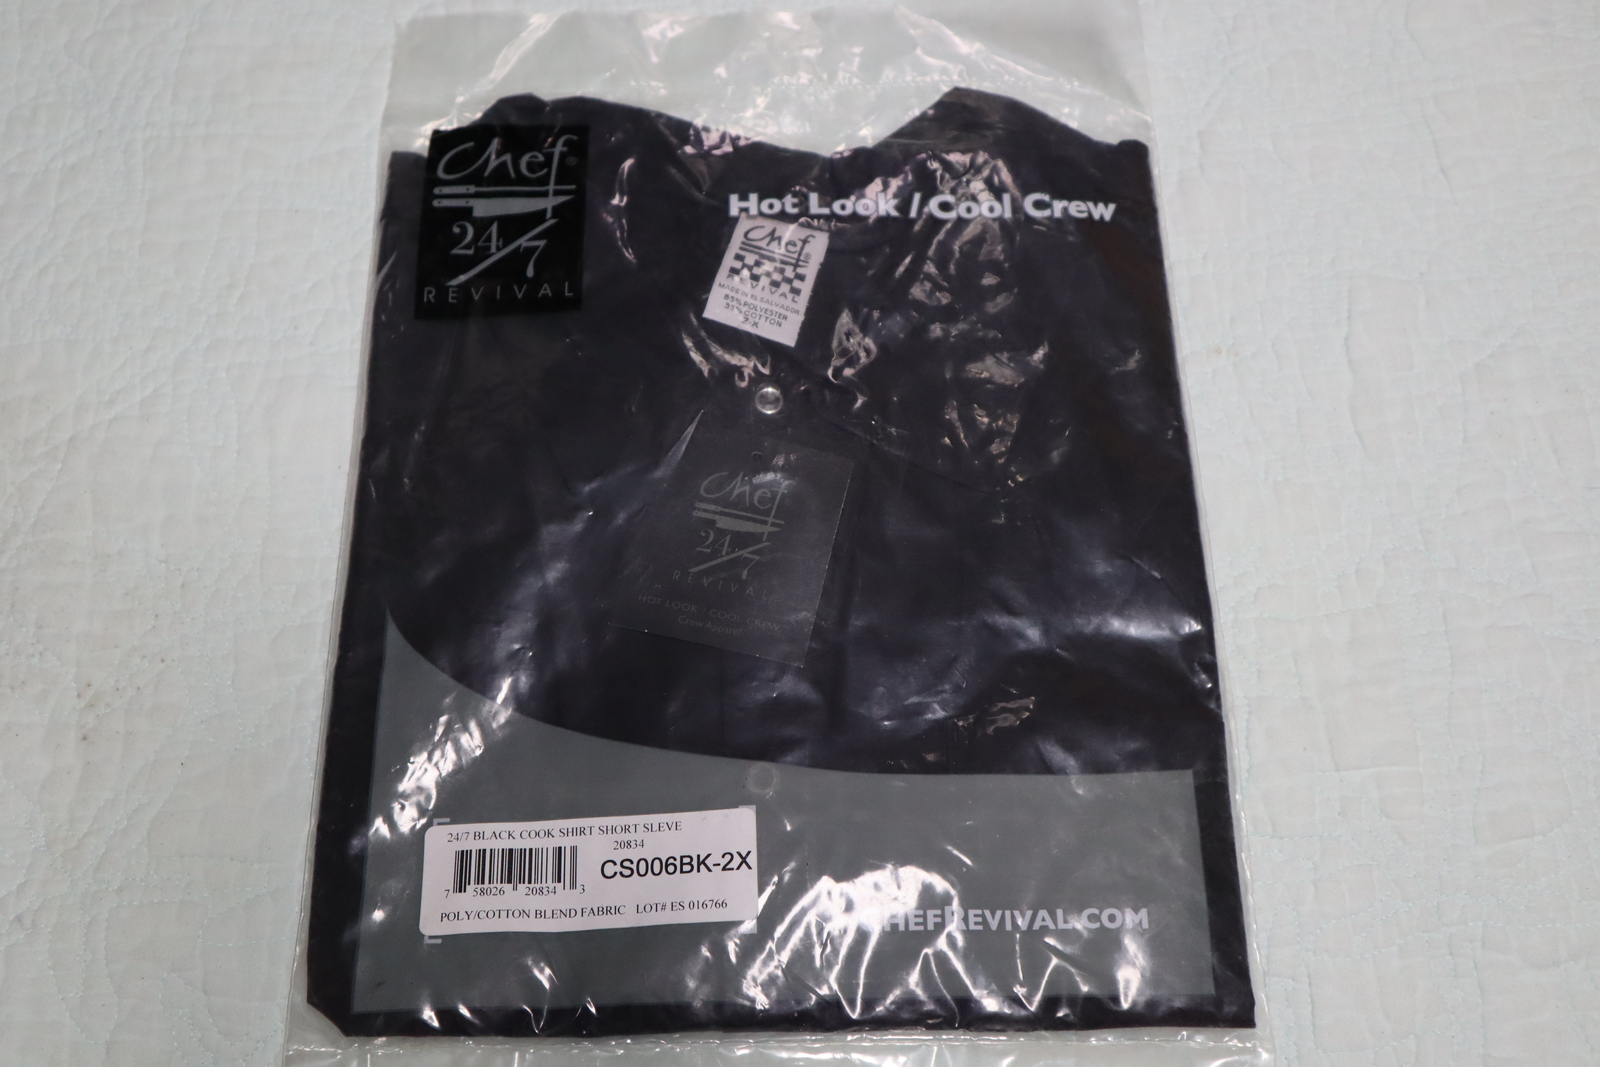 Primary image for CHEF REVIVAL Mens Short Sleeve Black Cook Shirt Size 2XL (NWT) CS006BK-2X